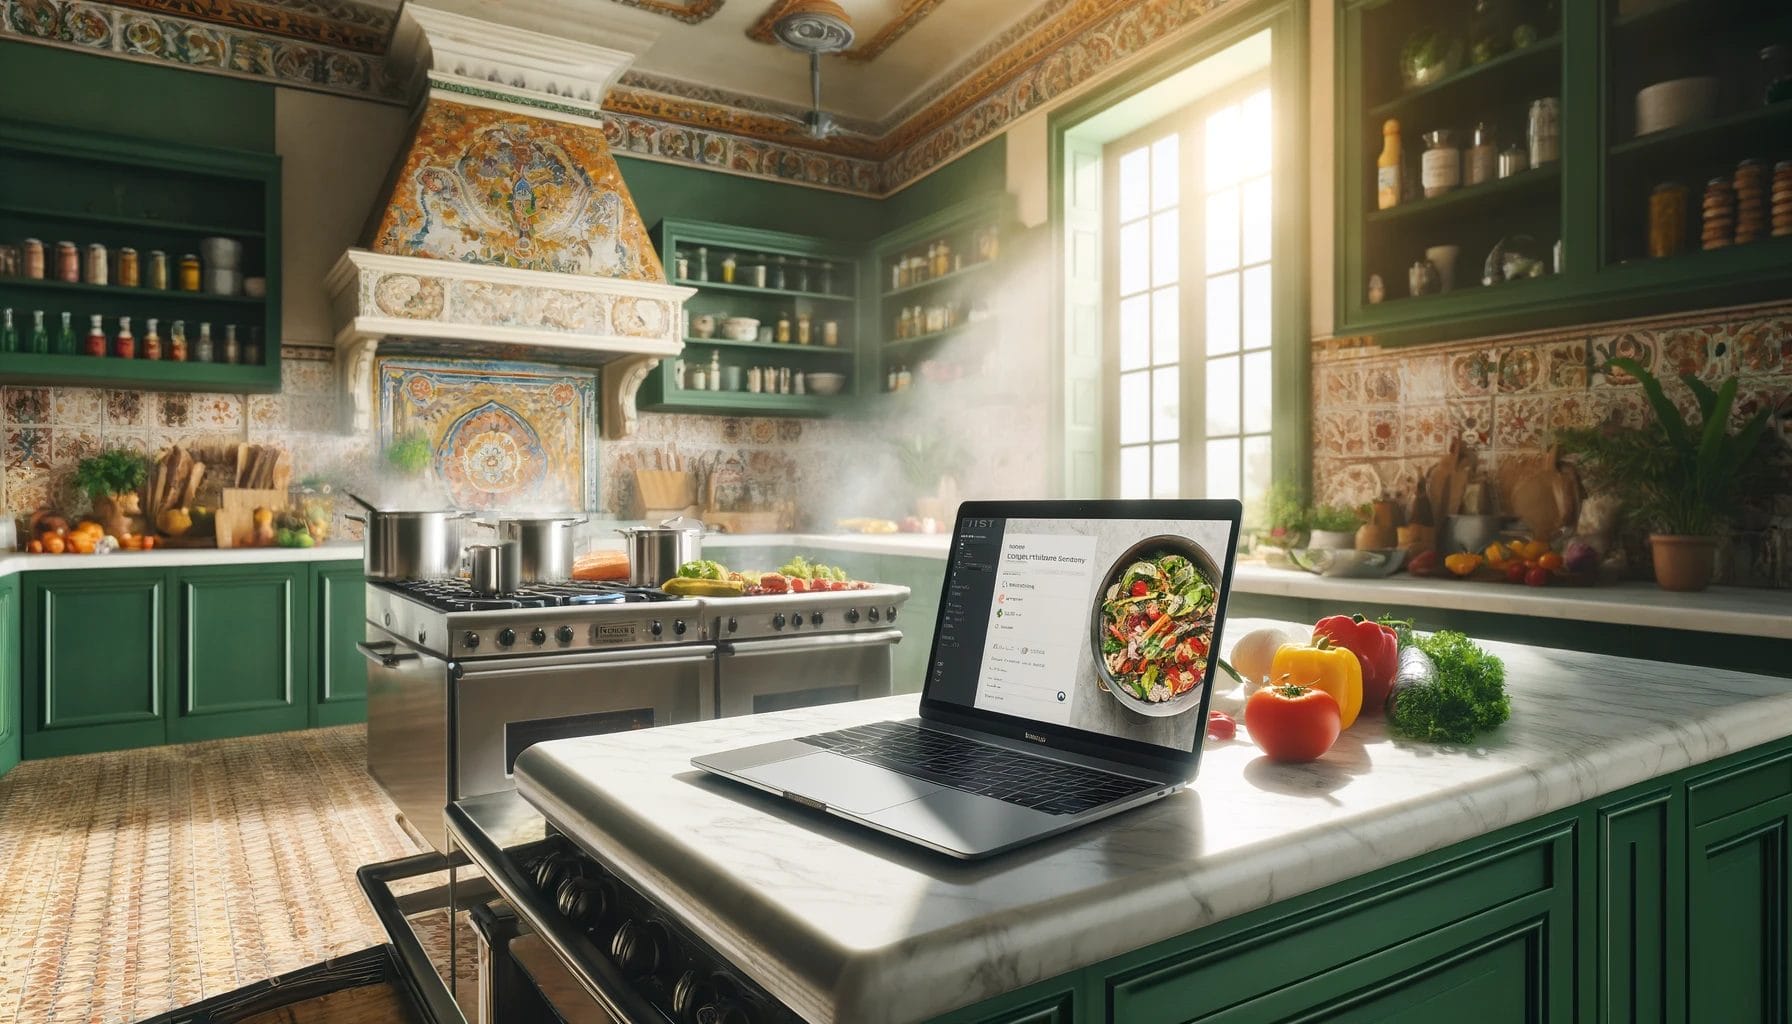 Sunlit, rustic Spanish kitchen with green cabinetry and colorful tiles, a laptop displaying a recipe on the counter amid fresh vegetables, and steaming cookware on the stove.